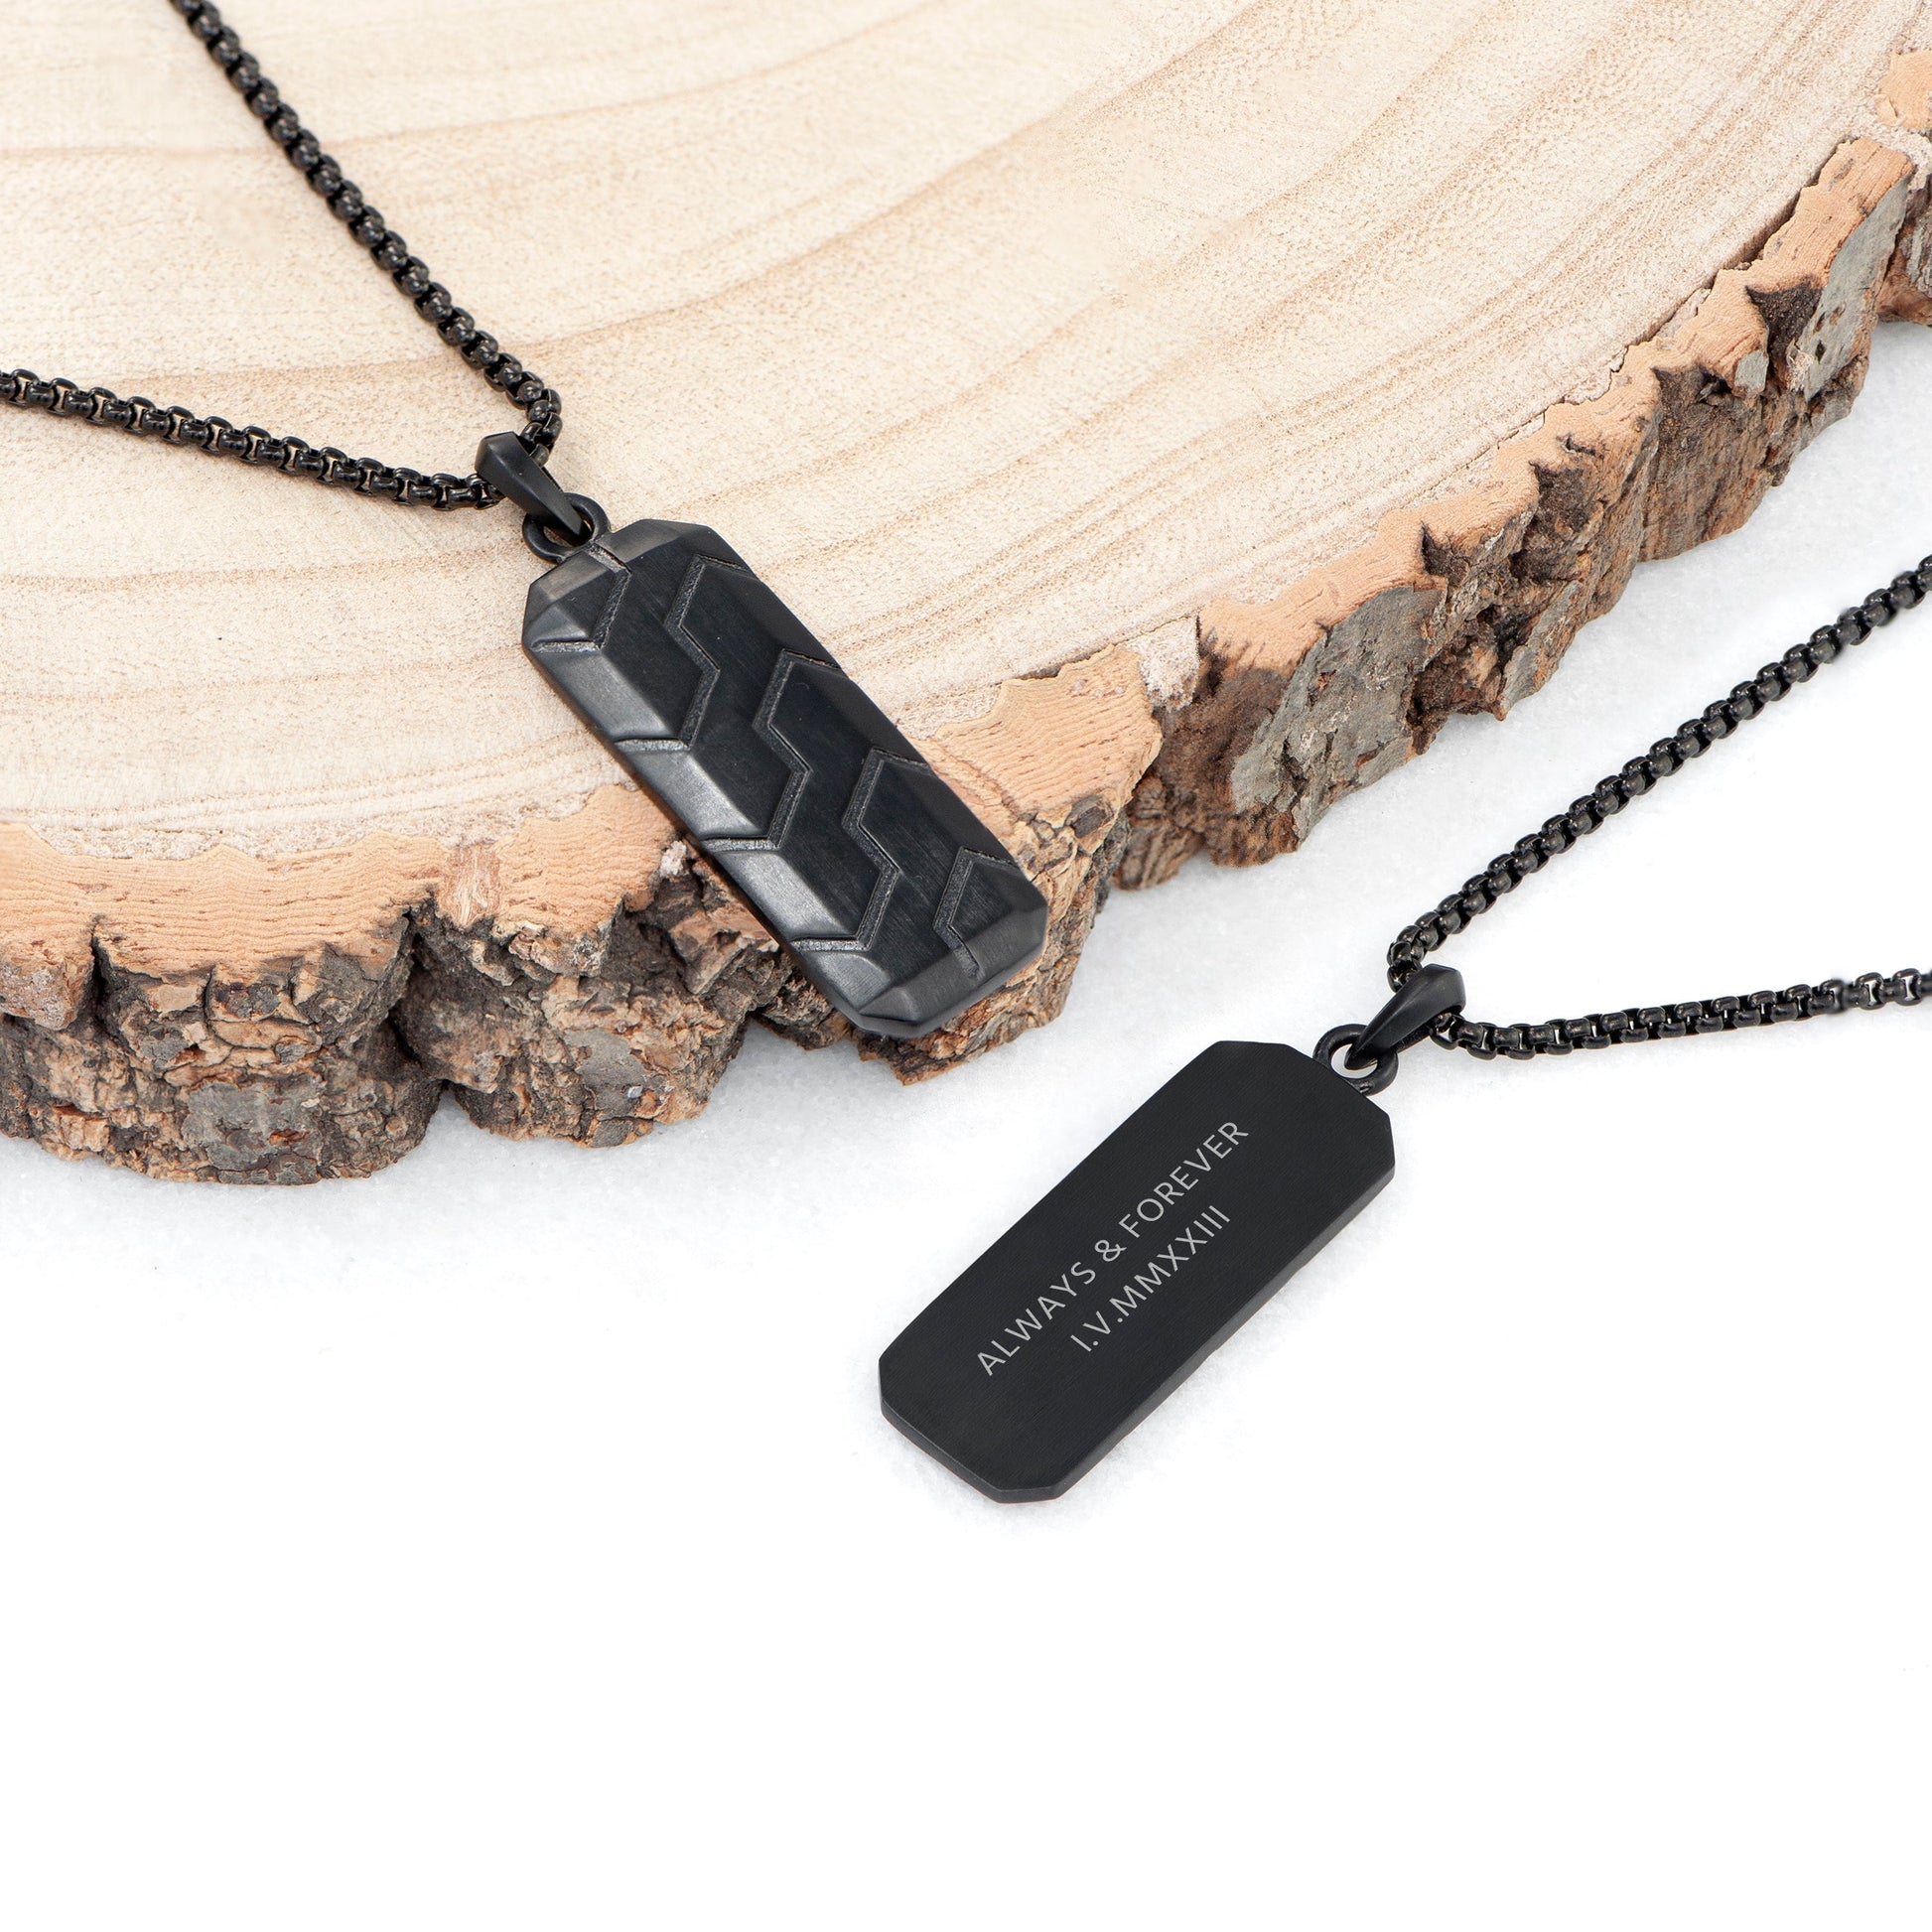 Personalized men's necklaces - Personalized Men's Tyretread Stone Necklace 